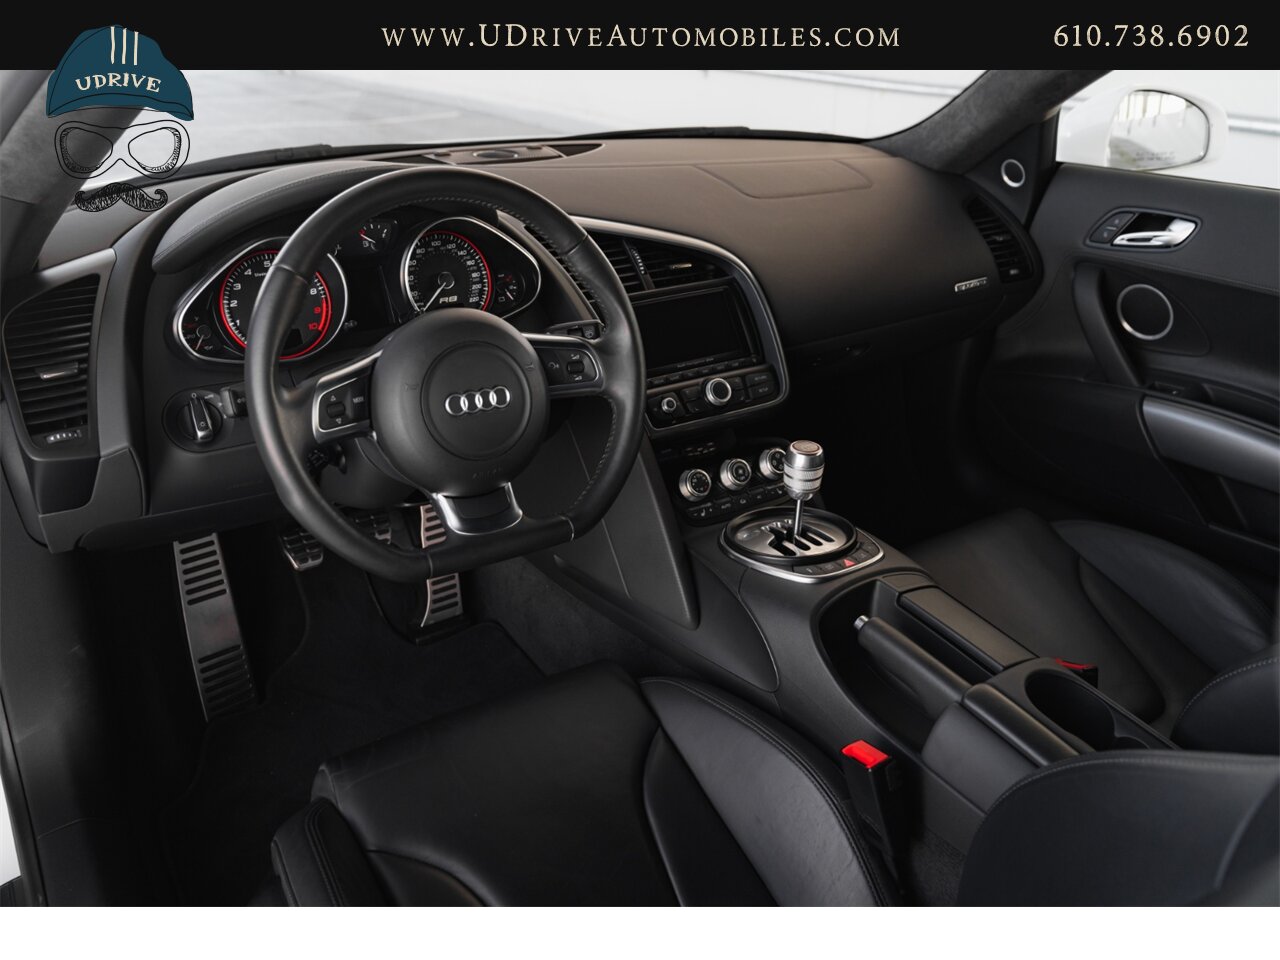 2010 Audi R8 5.2 Quattro V10 6 Speed Manual 8k Miles  Ibis White Service History - Photo 5 - West Chester, PA 19382